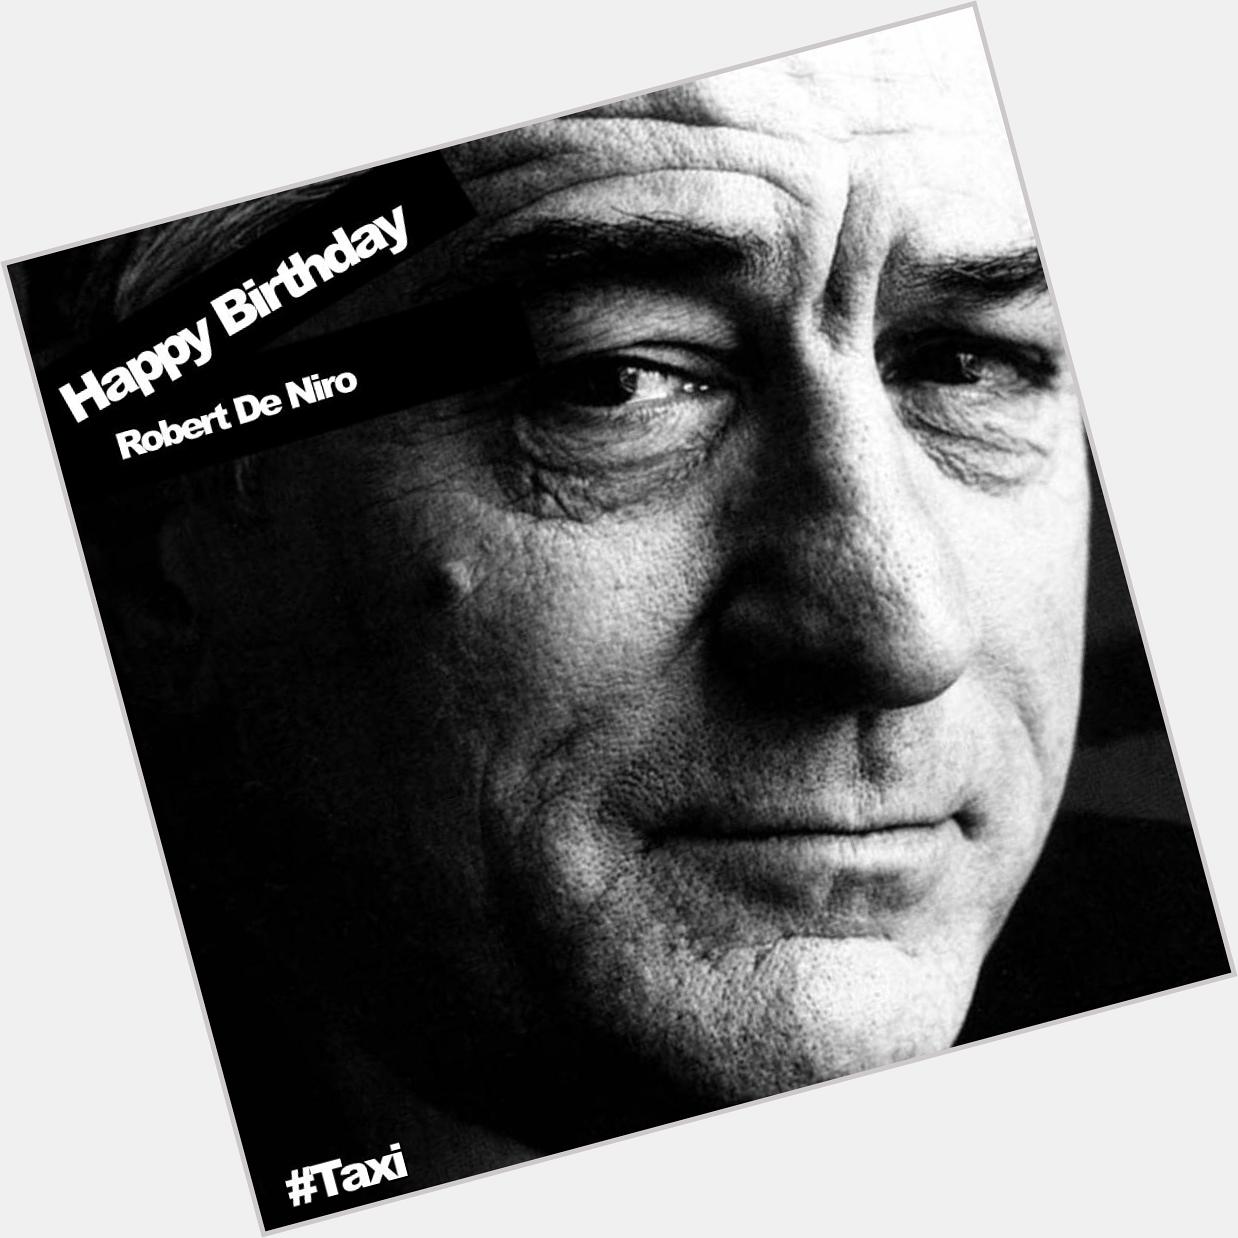 Happy Birthday to Robert De Niro, the Taxi Driver and Goodfellas star turns 72 today.  